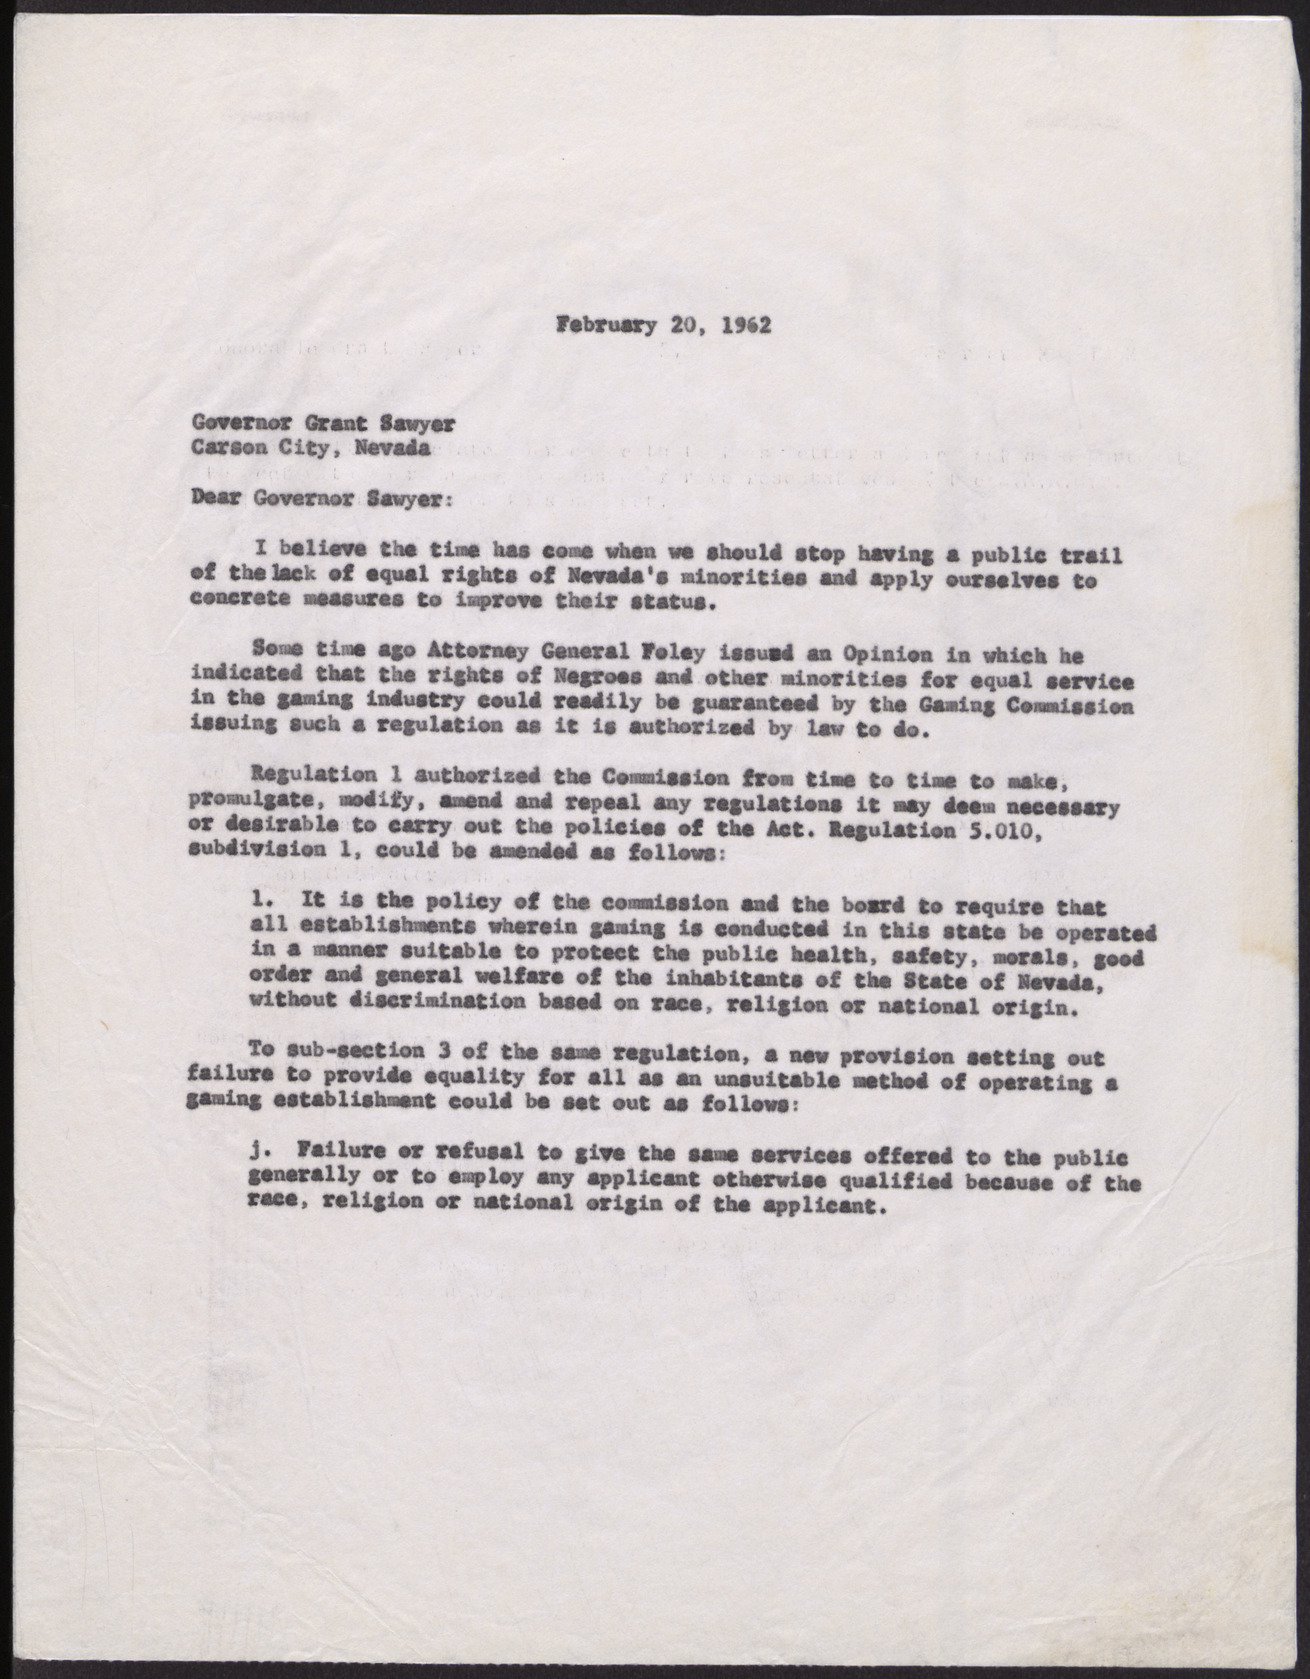 Letter to Grant Sawyer from Rev. Donald M. Clark (2 pages), February 20, 1962